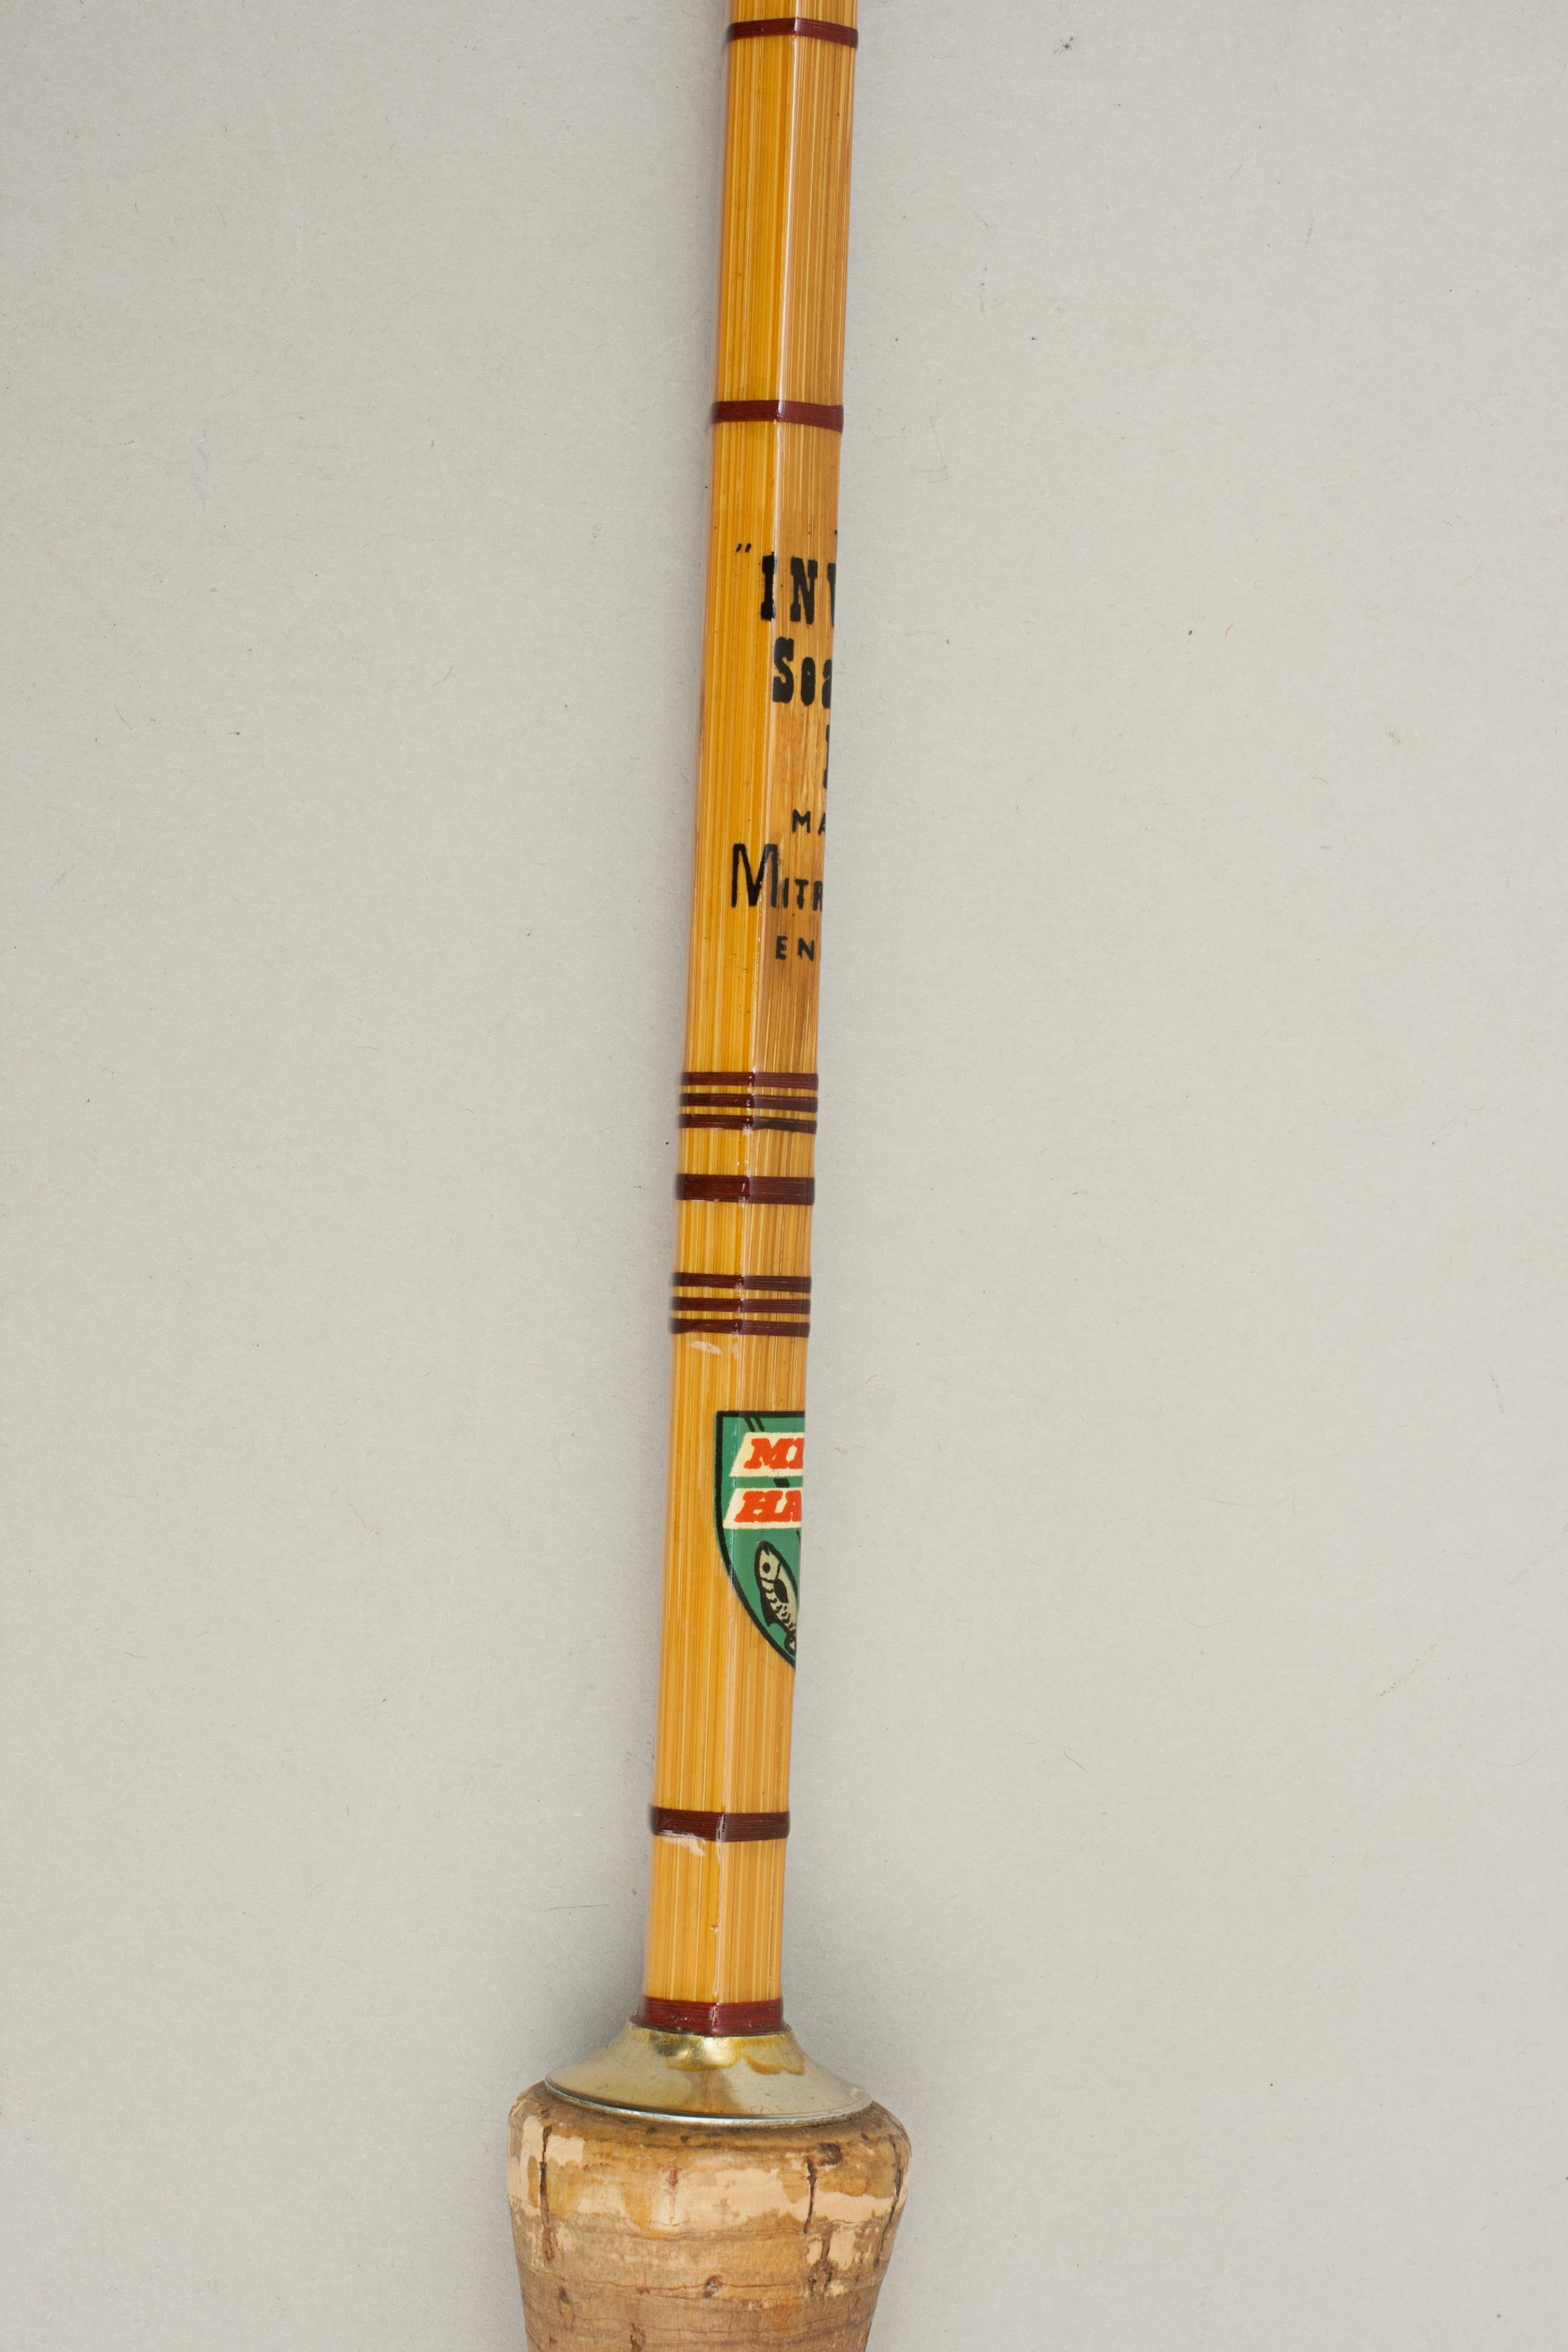 Vintage Hardy Fishing Rod, Mitre, Hardy, The Invicta Sea Trout Fly Fishing Rod 6